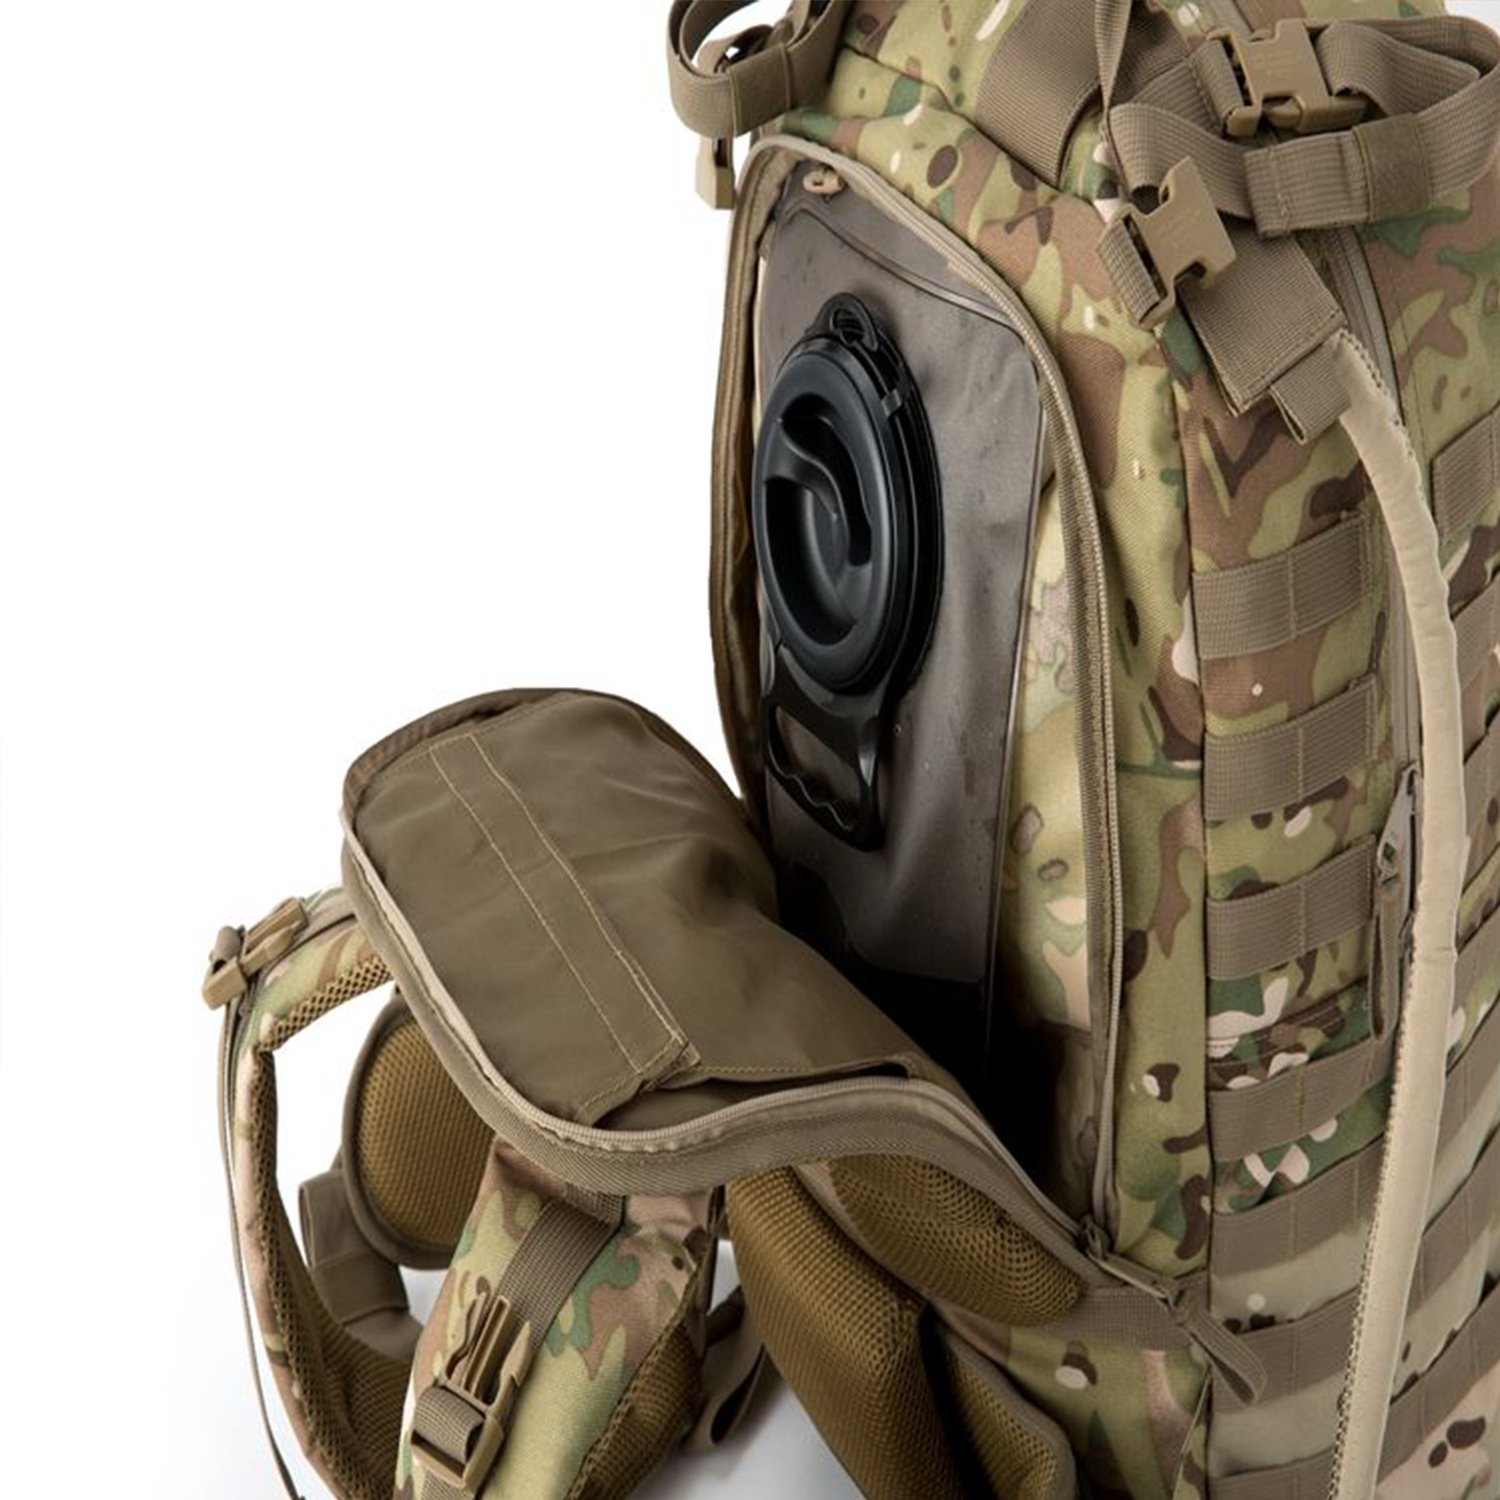 MOLLE Laser Cutting Assault Backpack Hydration Pack Multicam Camouflage